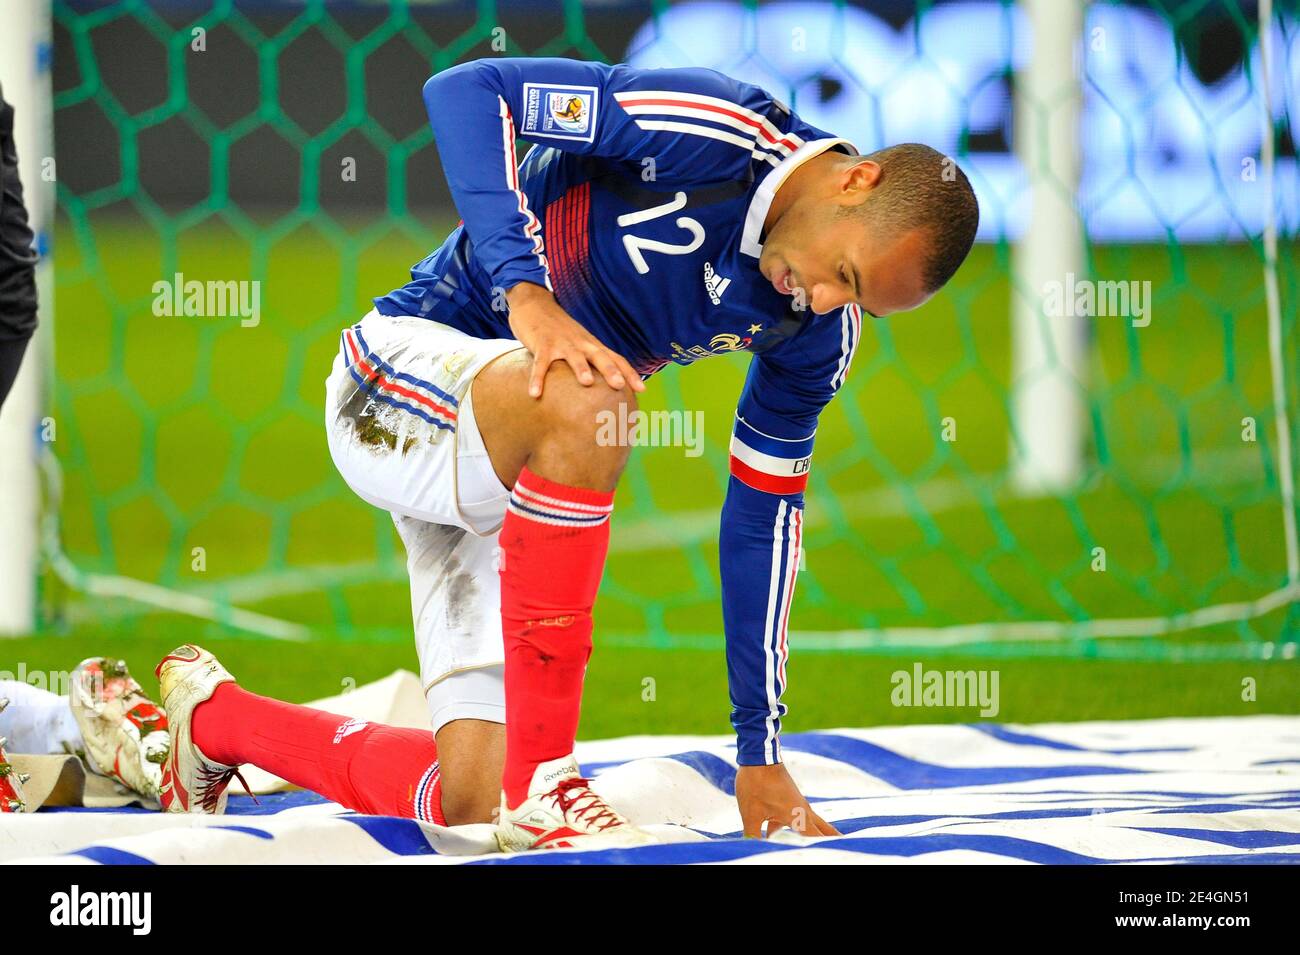 France's Thierry Henry during World Cup Play-off soccer match, France vs Republic of Ireland at Stade de France in Saint-Denis near Paris, France on November 18, 2009. The Match ended in a 1-1 draw. Photo by Stephane Reix/ABACAPRESS.COM Stock Photo